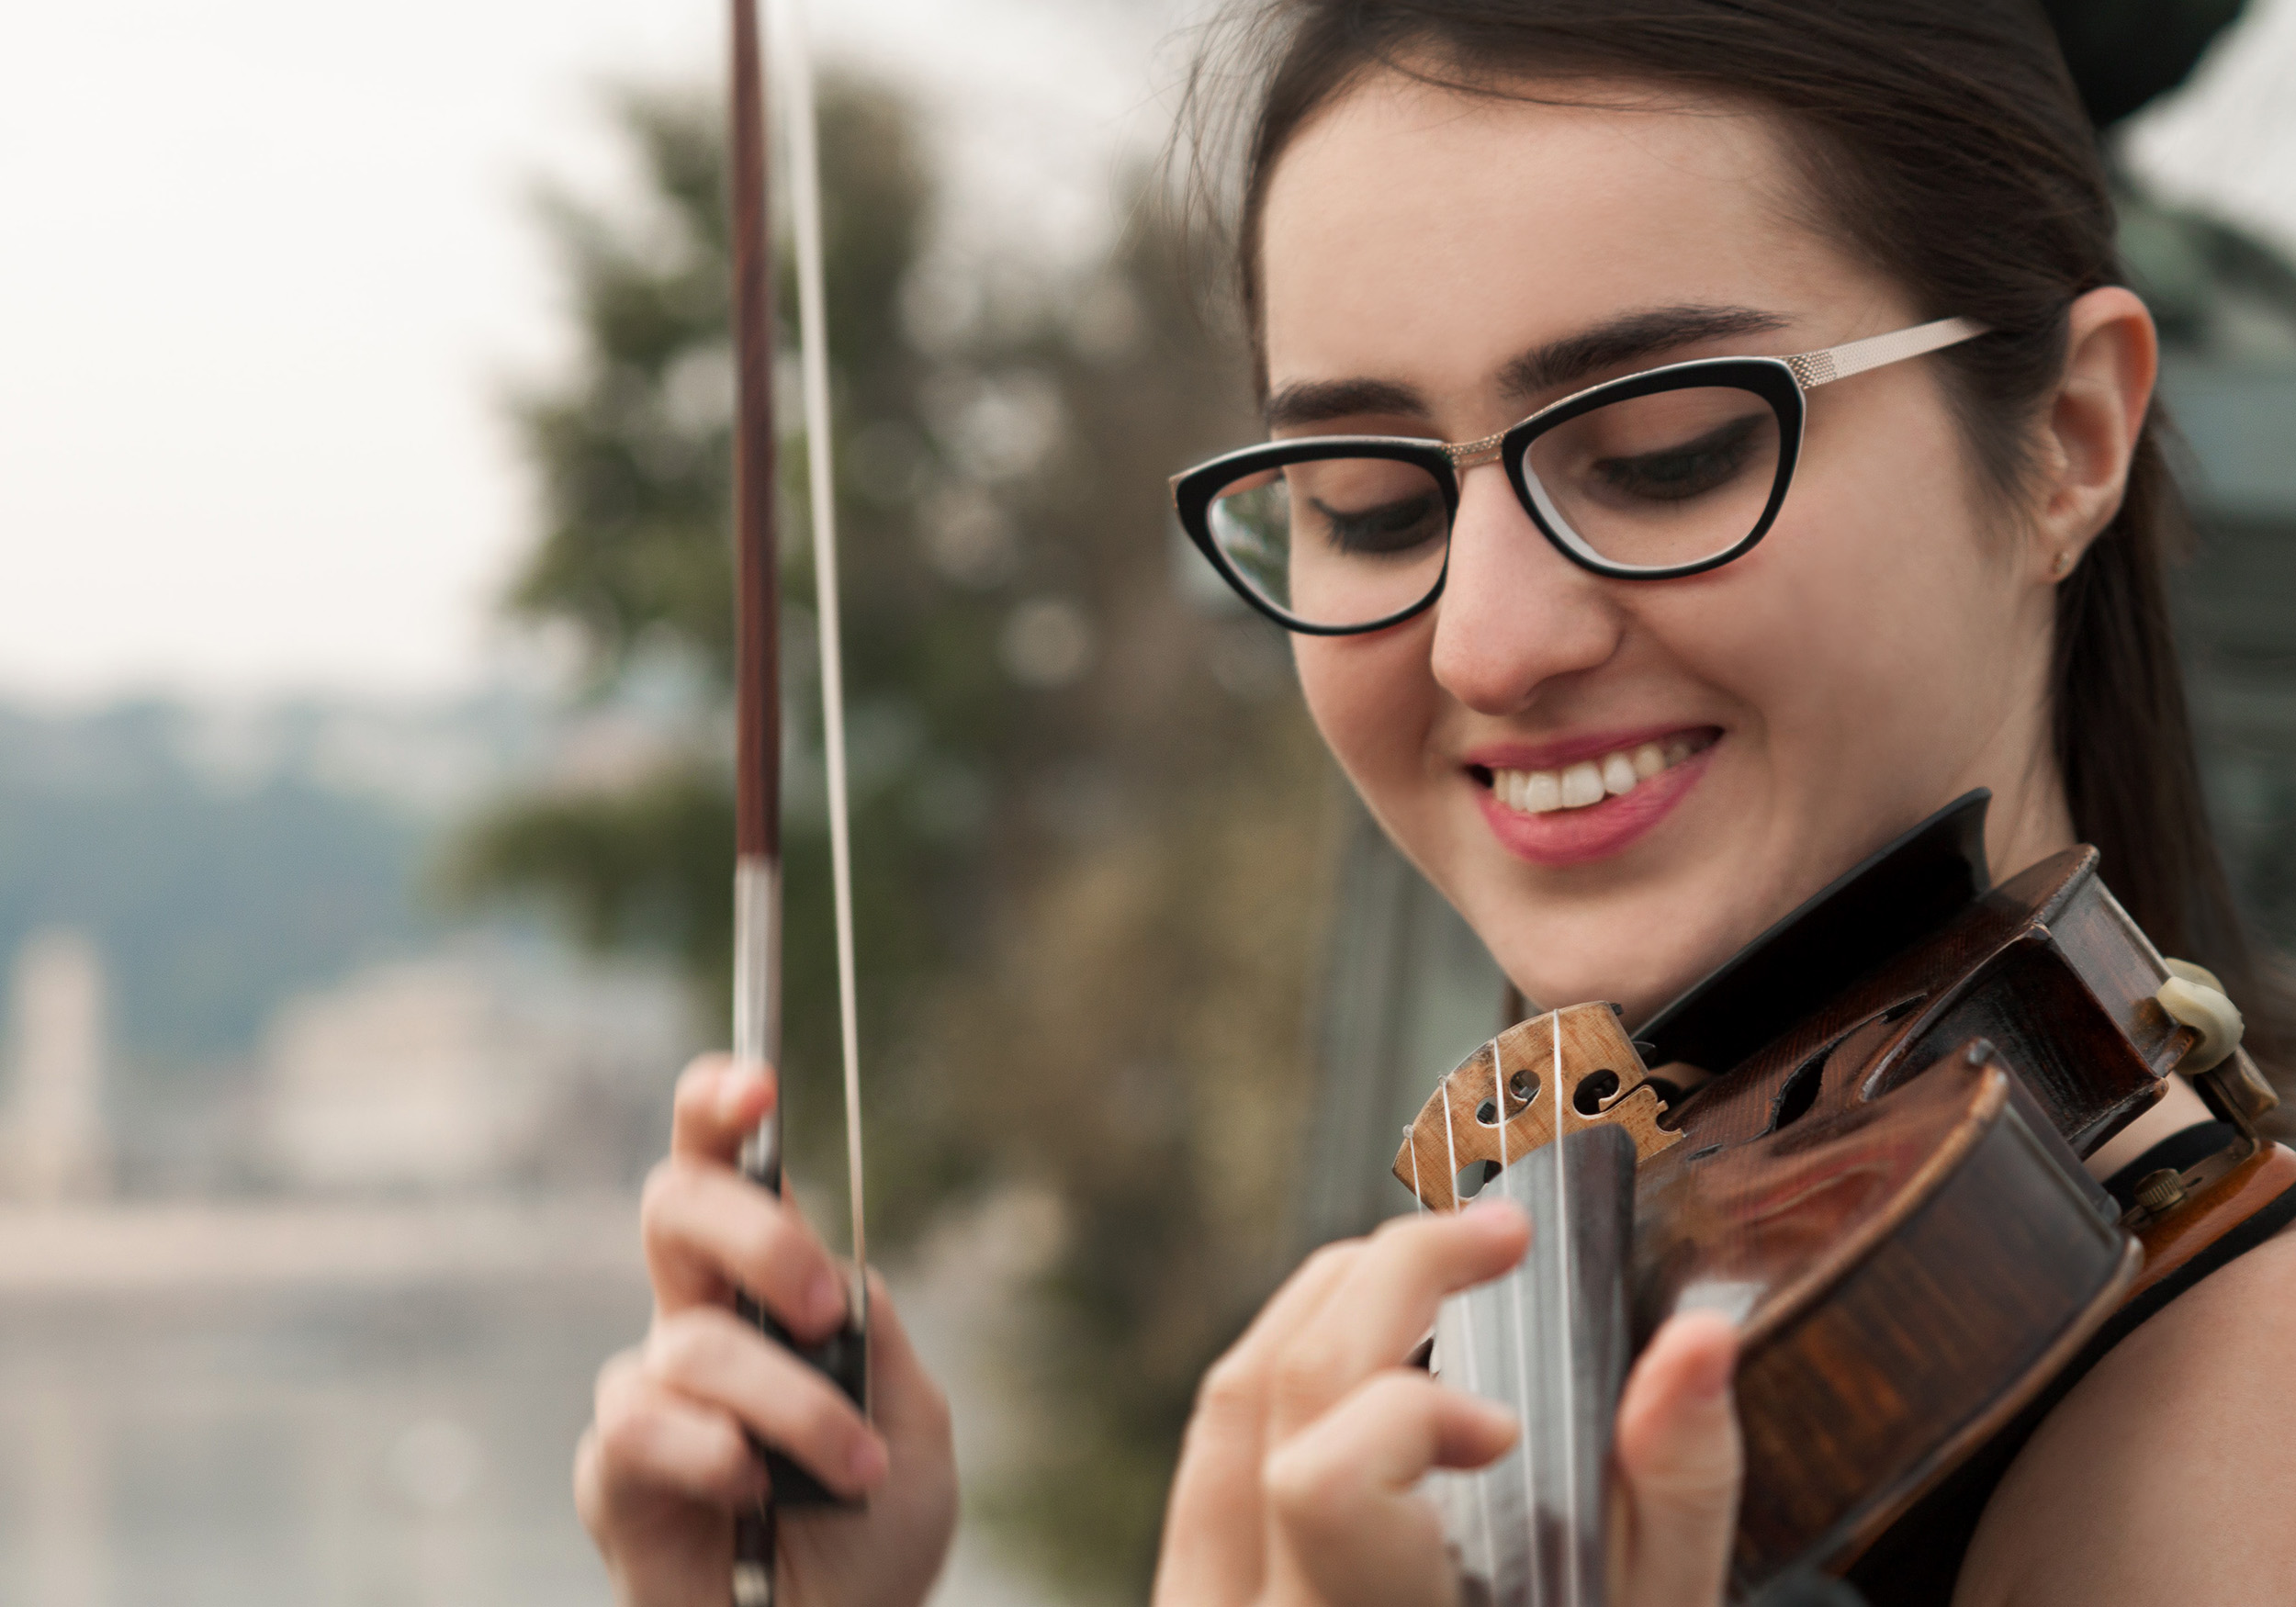 dark haired, bespectacled woman playing violin and smiling